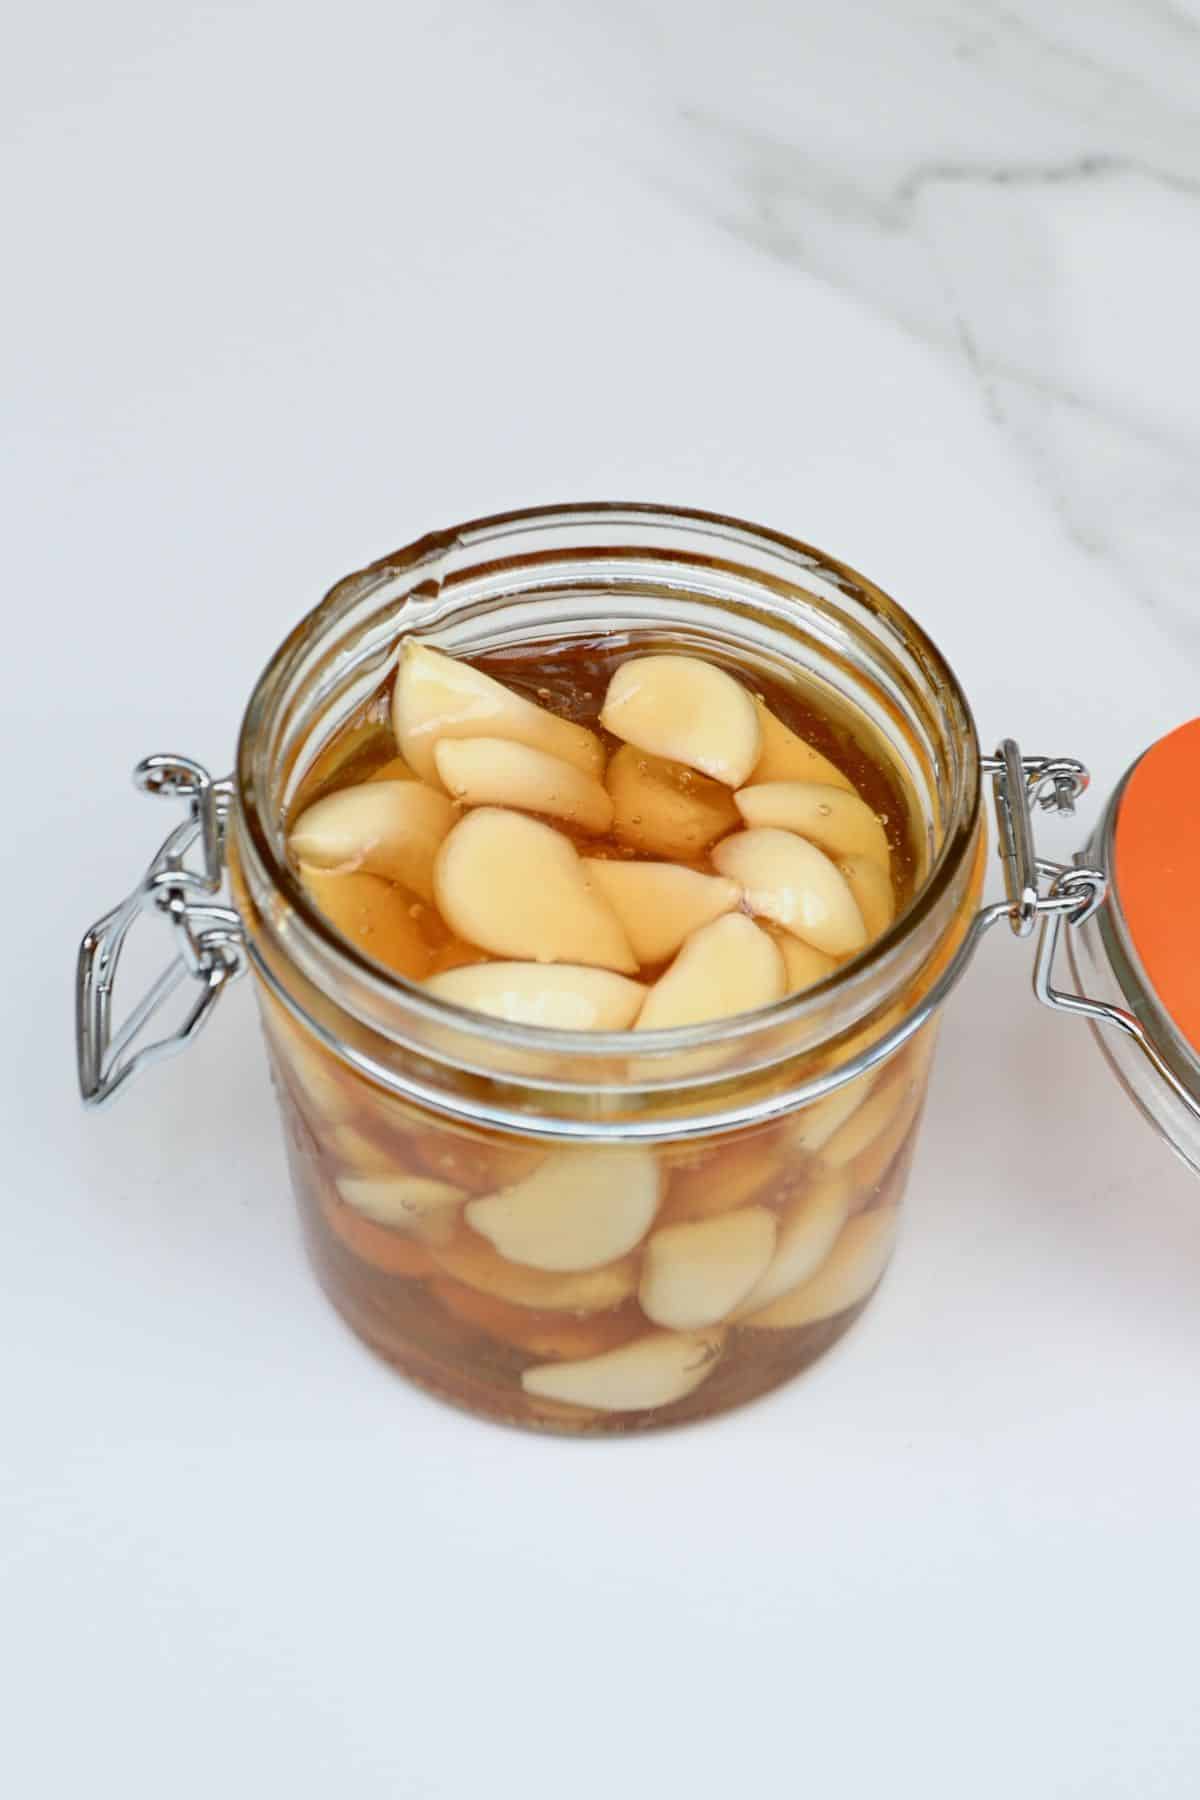 Top view of a jar with fermented honey garlic